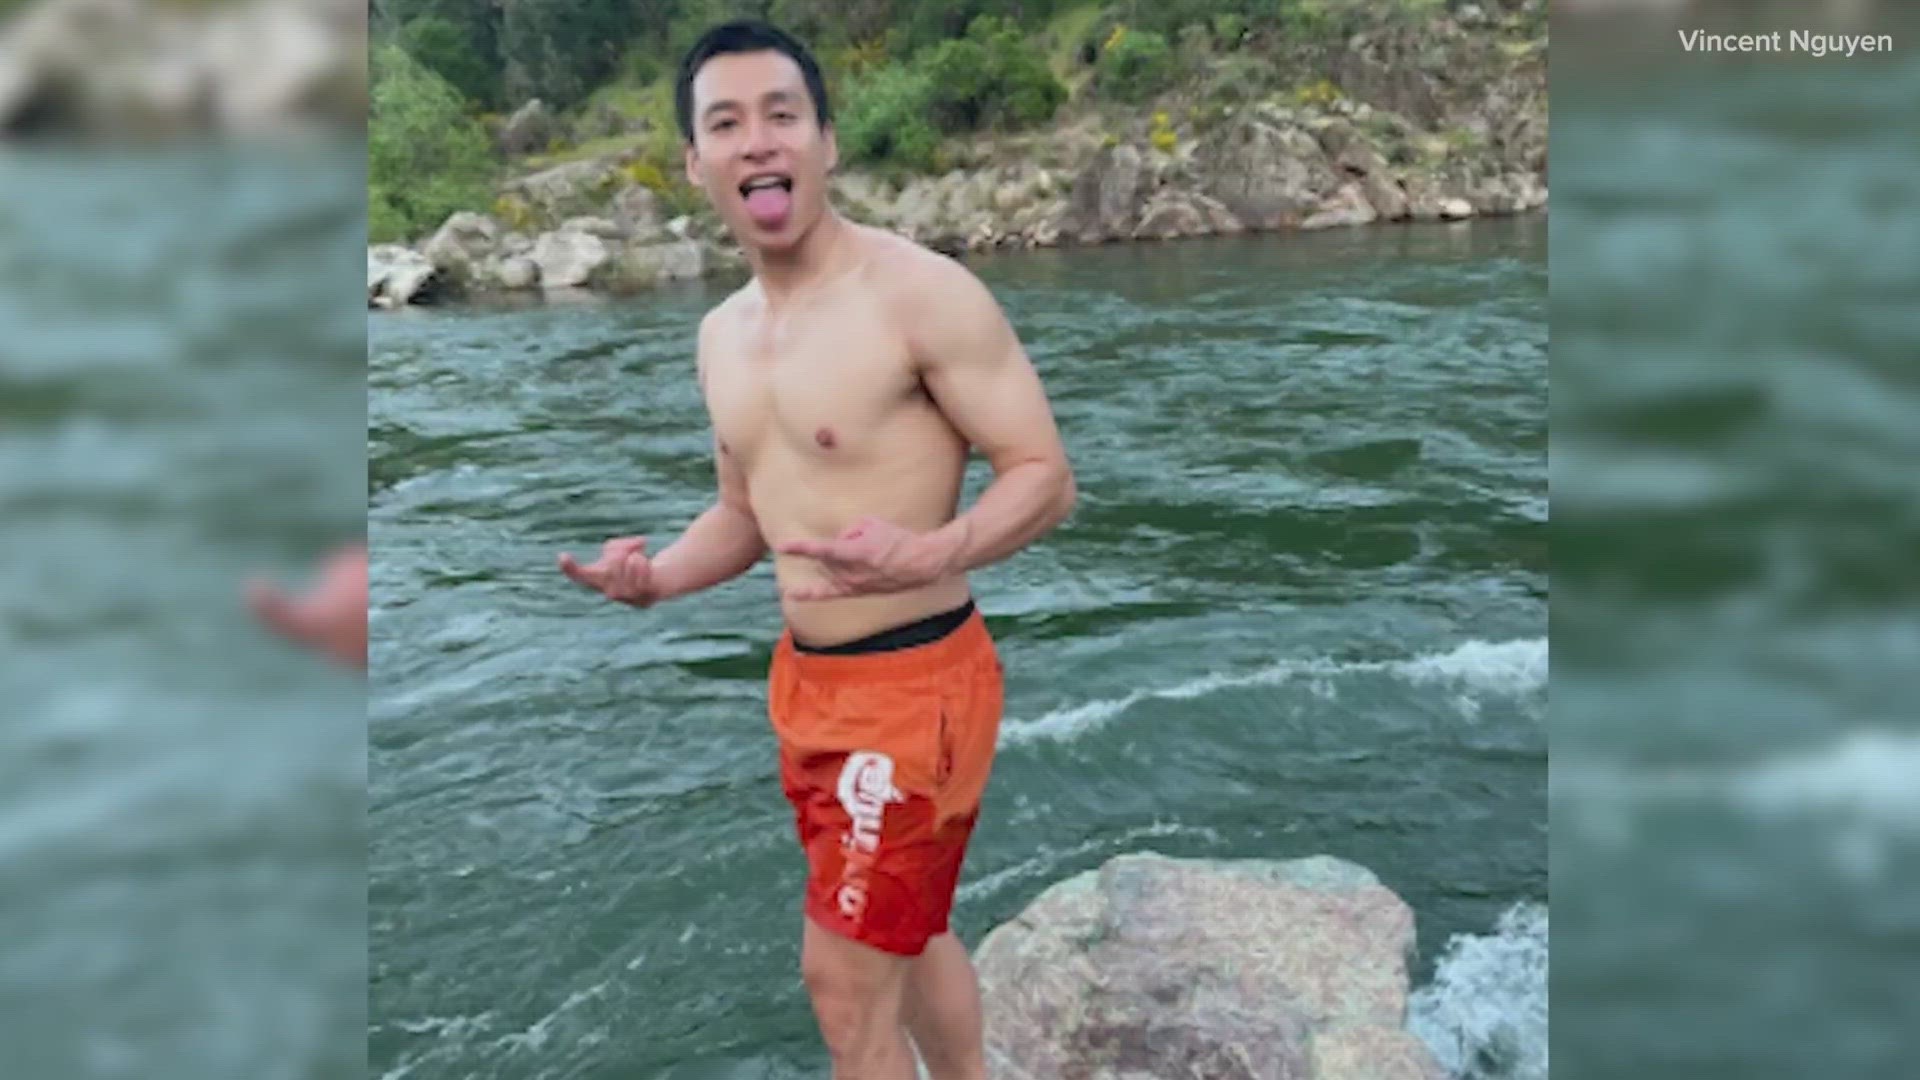 Victor Nguyen, 22, was swept up by the fast moving current April 29. His body was recovered in Folsom Lake three weeks later.